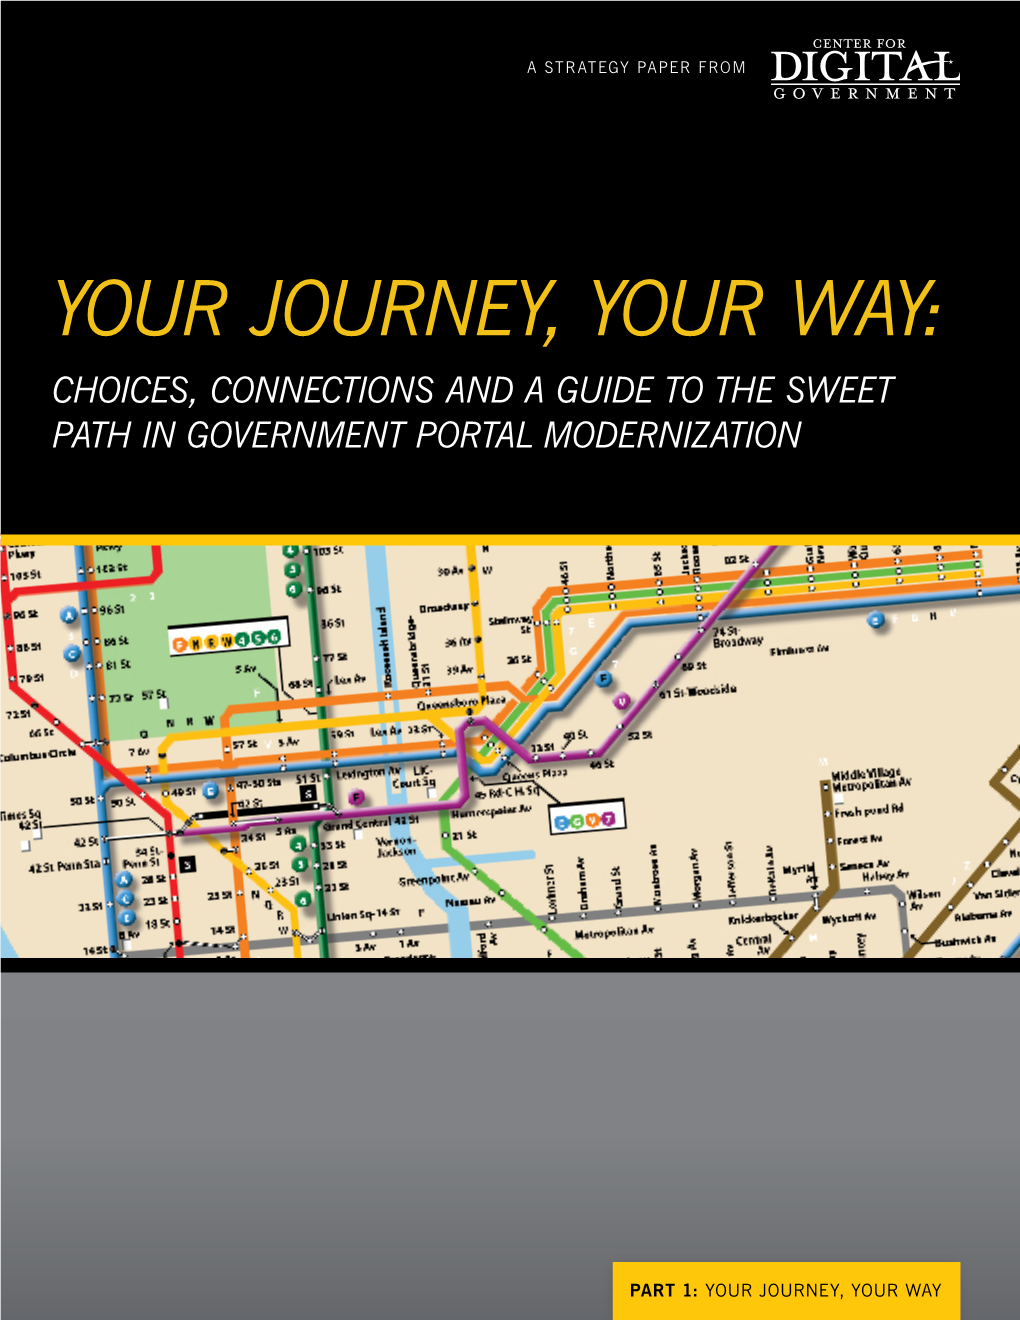 Your Journey, Your Way: Choi Ces, Connections and a Guide to the Sweet Path in Government Portal Modernization